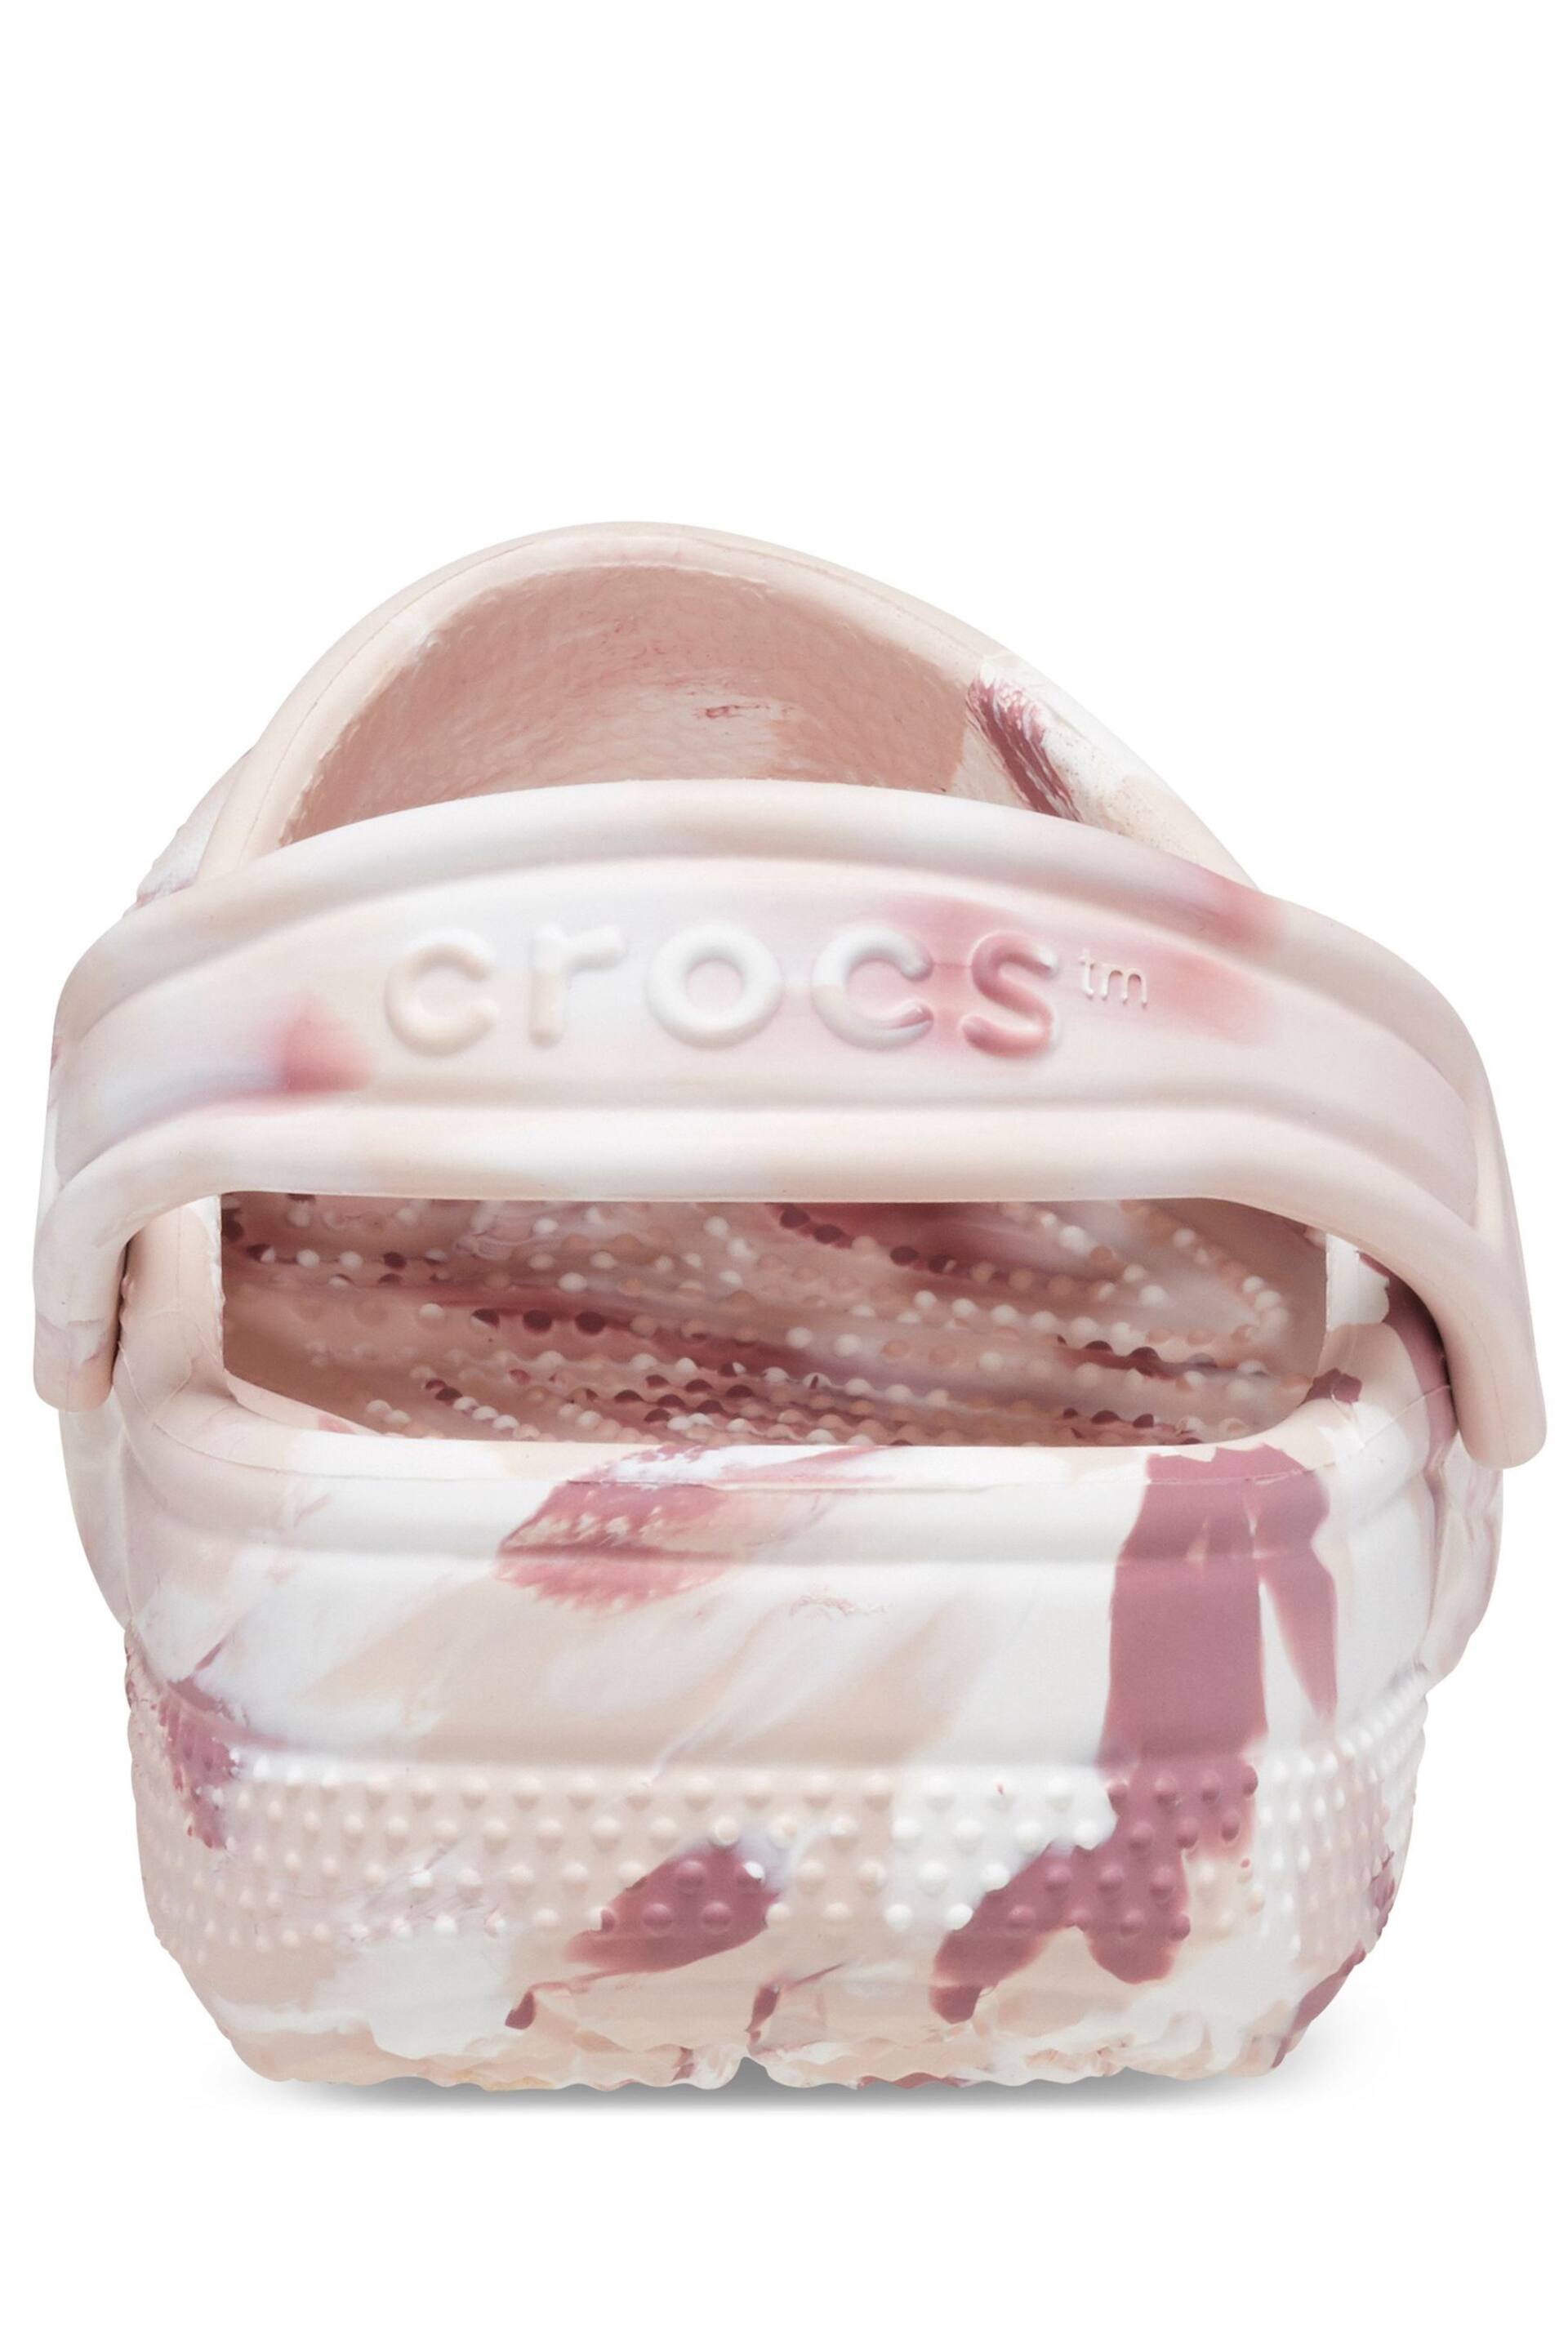 Crocs Classic Kids Marbled Clogs - Image 8 of 13